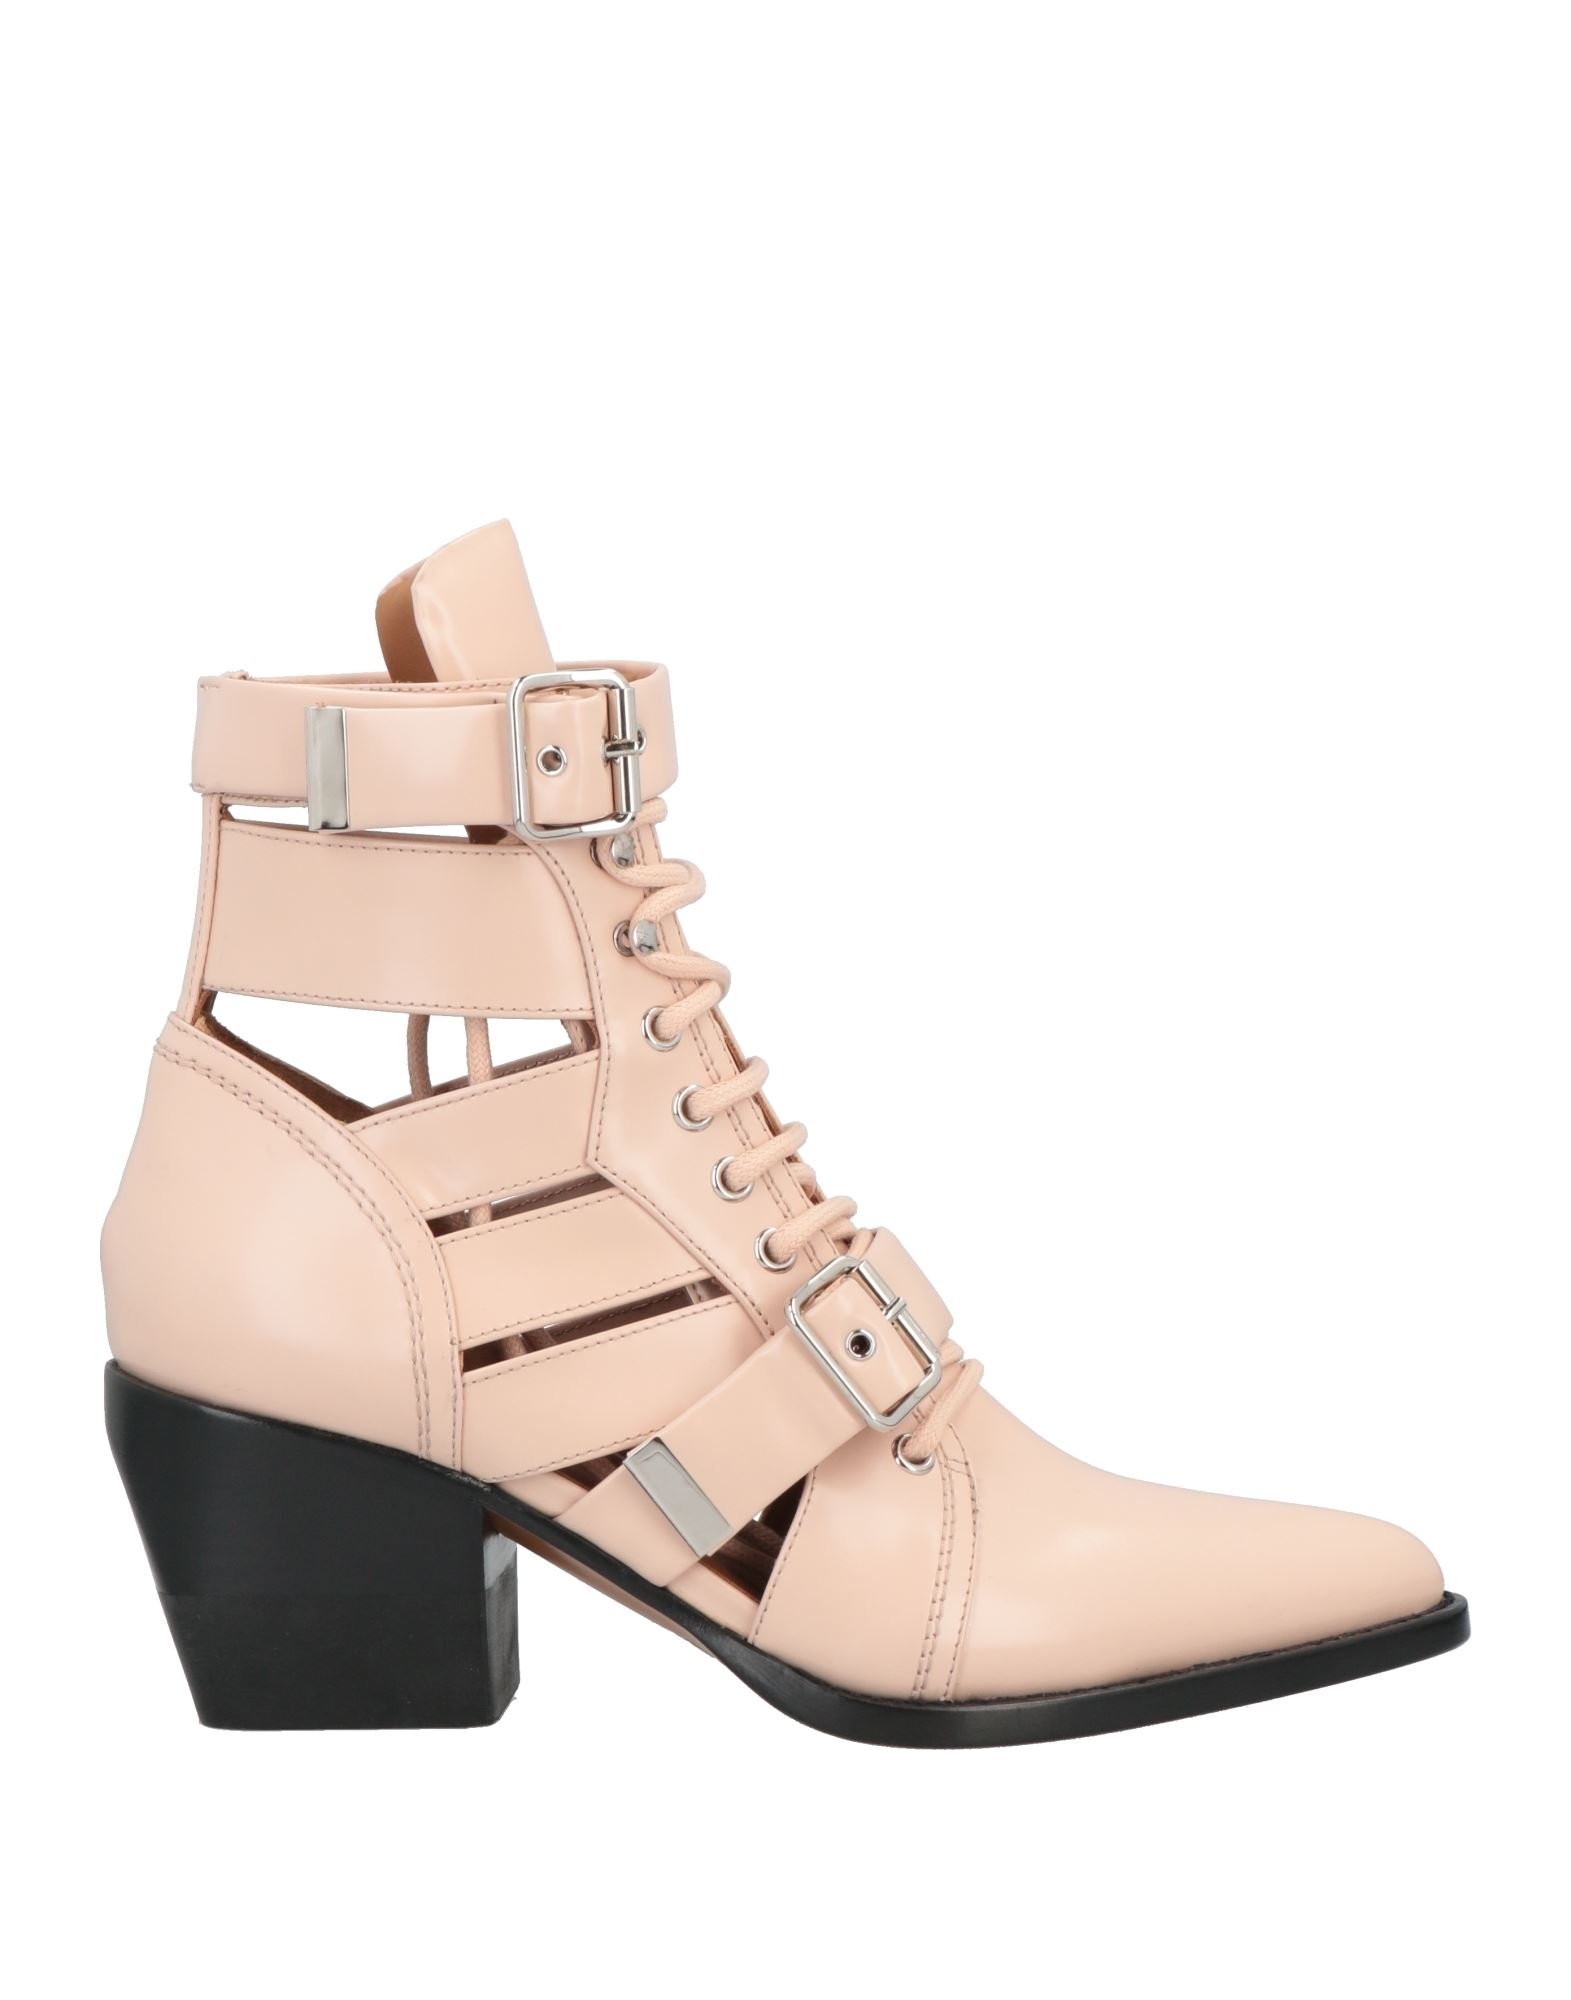 CHLOÉ Rylee cutout leather ankle boots